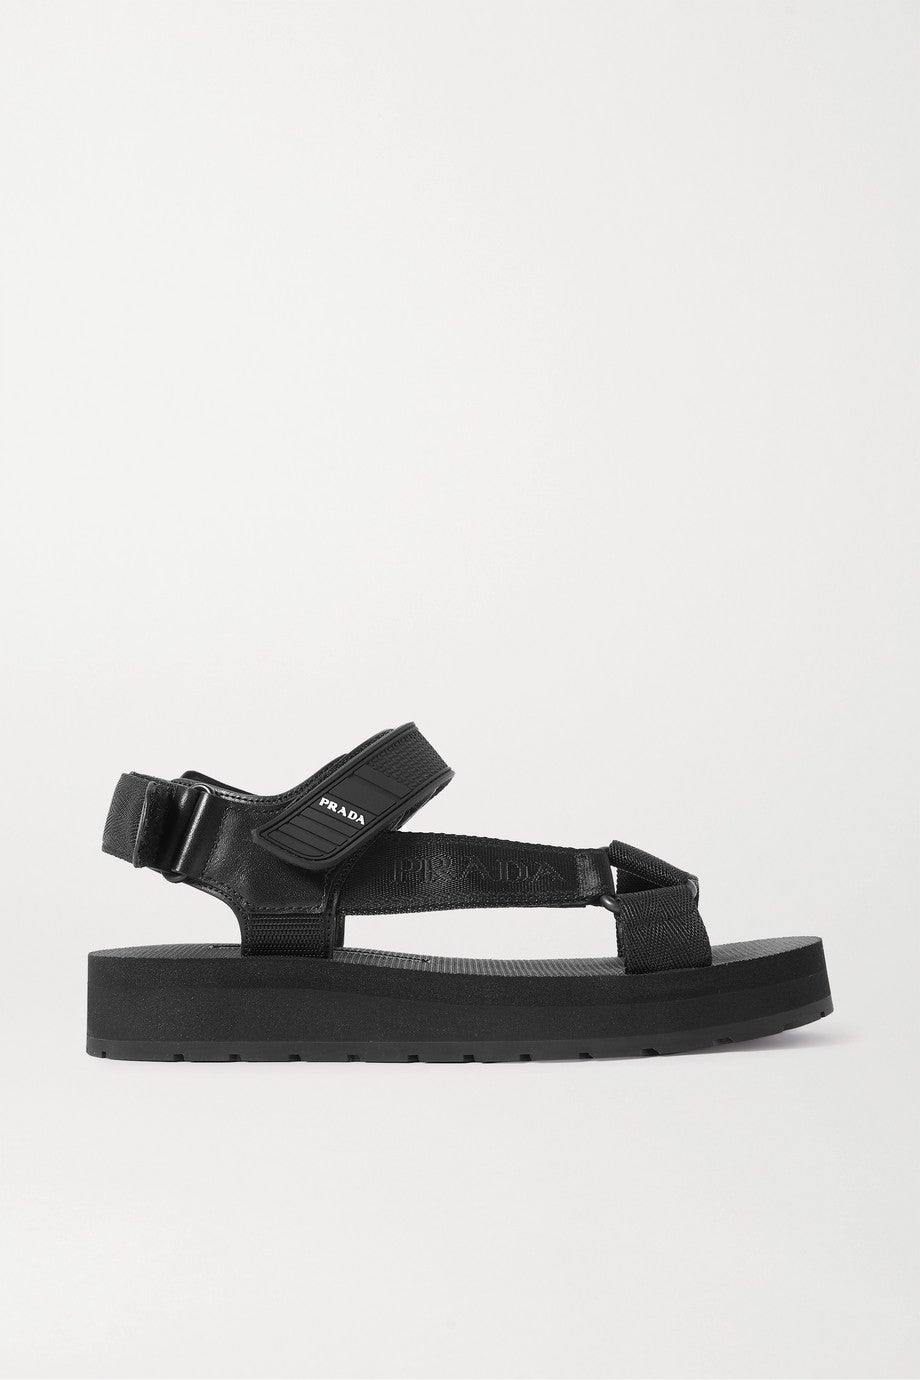 Prada + Nomad Logo-print Rubber and Leather-trimmed Canvas Sandals